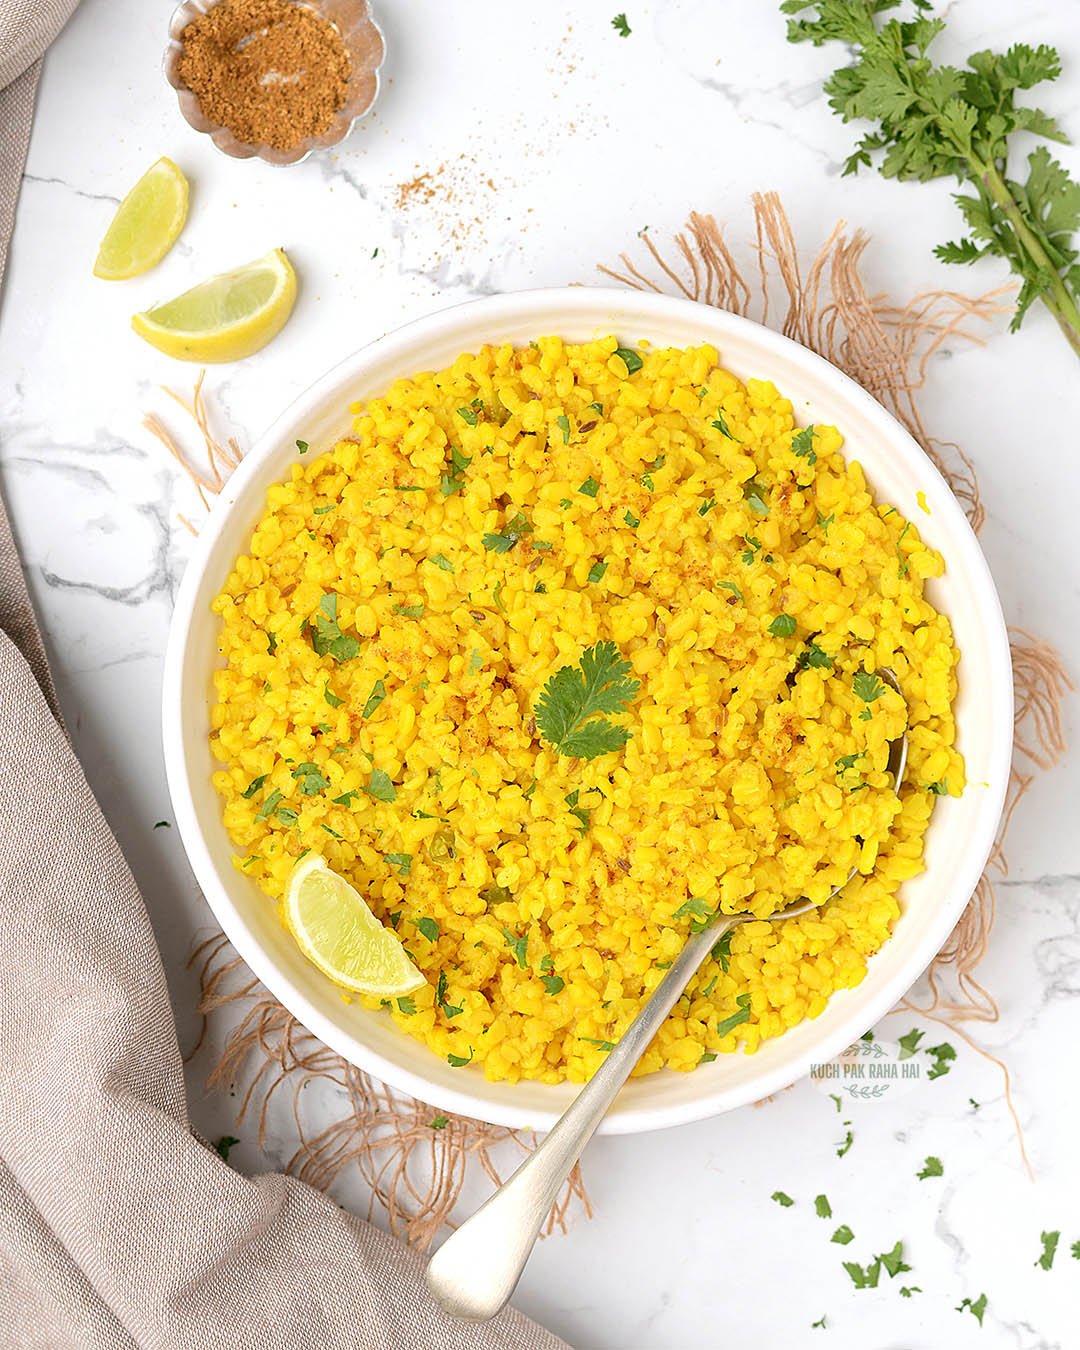 Sukhi moong dal or yellow moong dal served in breakfast.